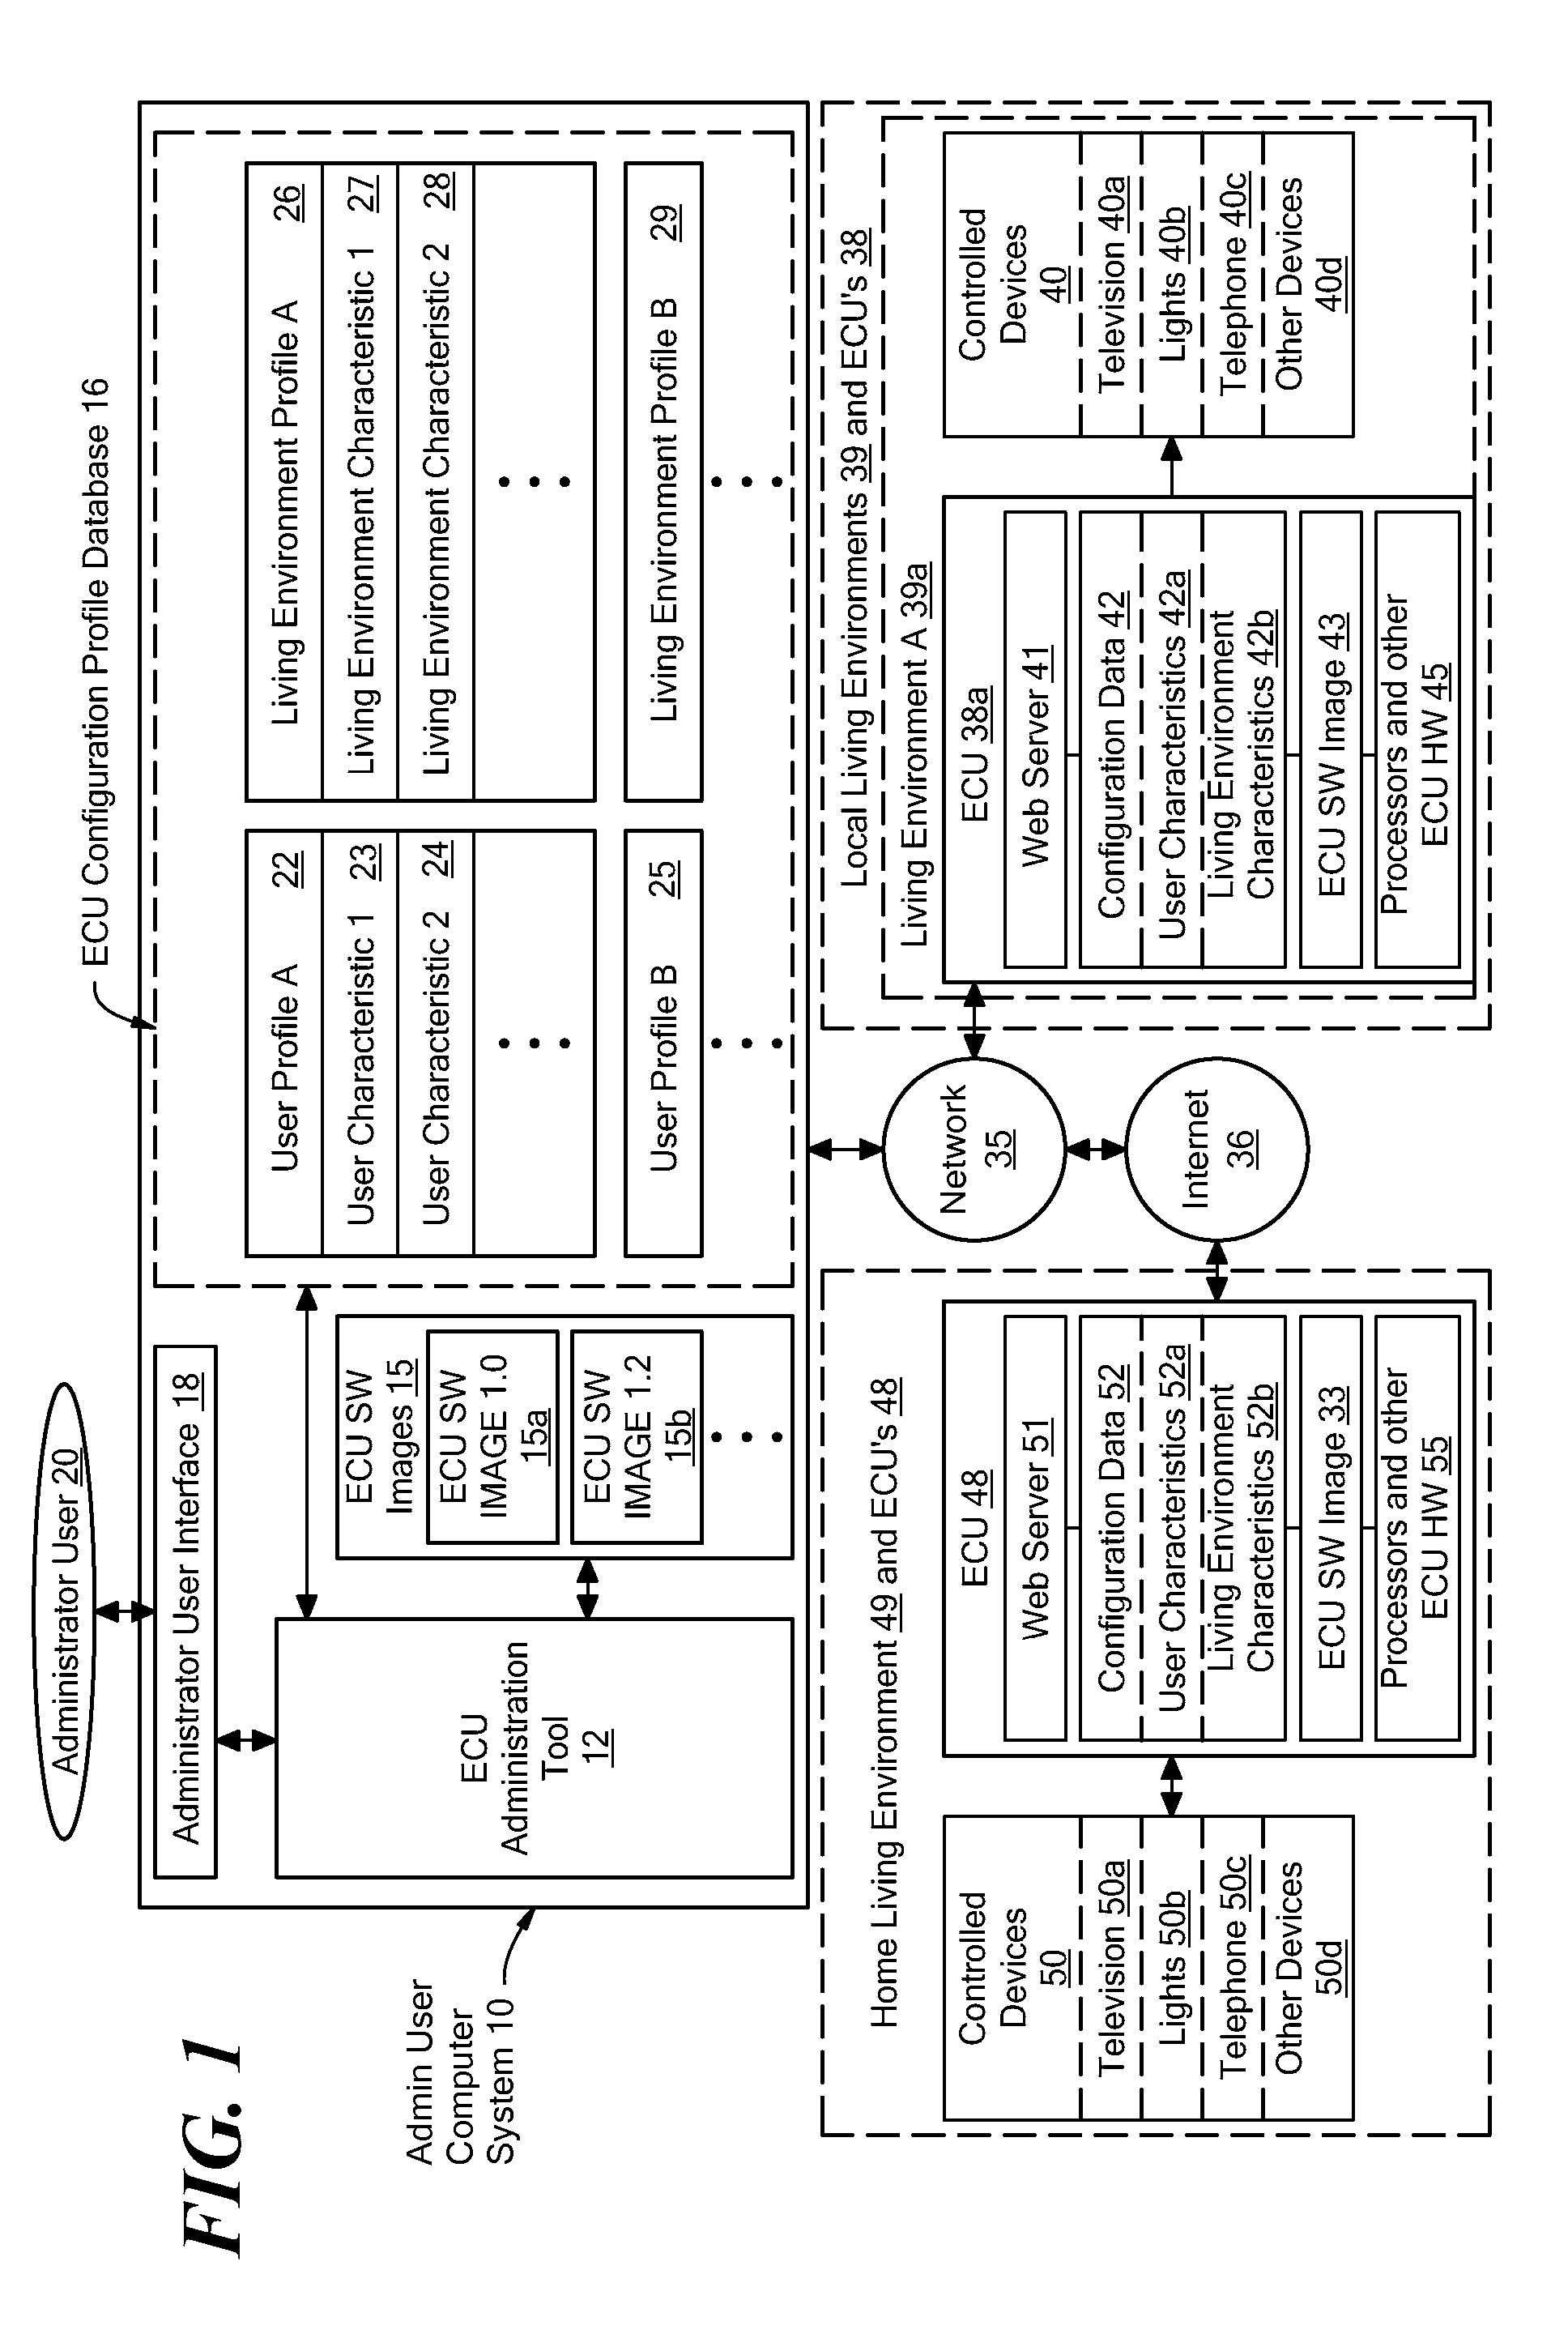 System and method for configuring and maintaining individual and multiple environmental control units over a communication network from an administration system